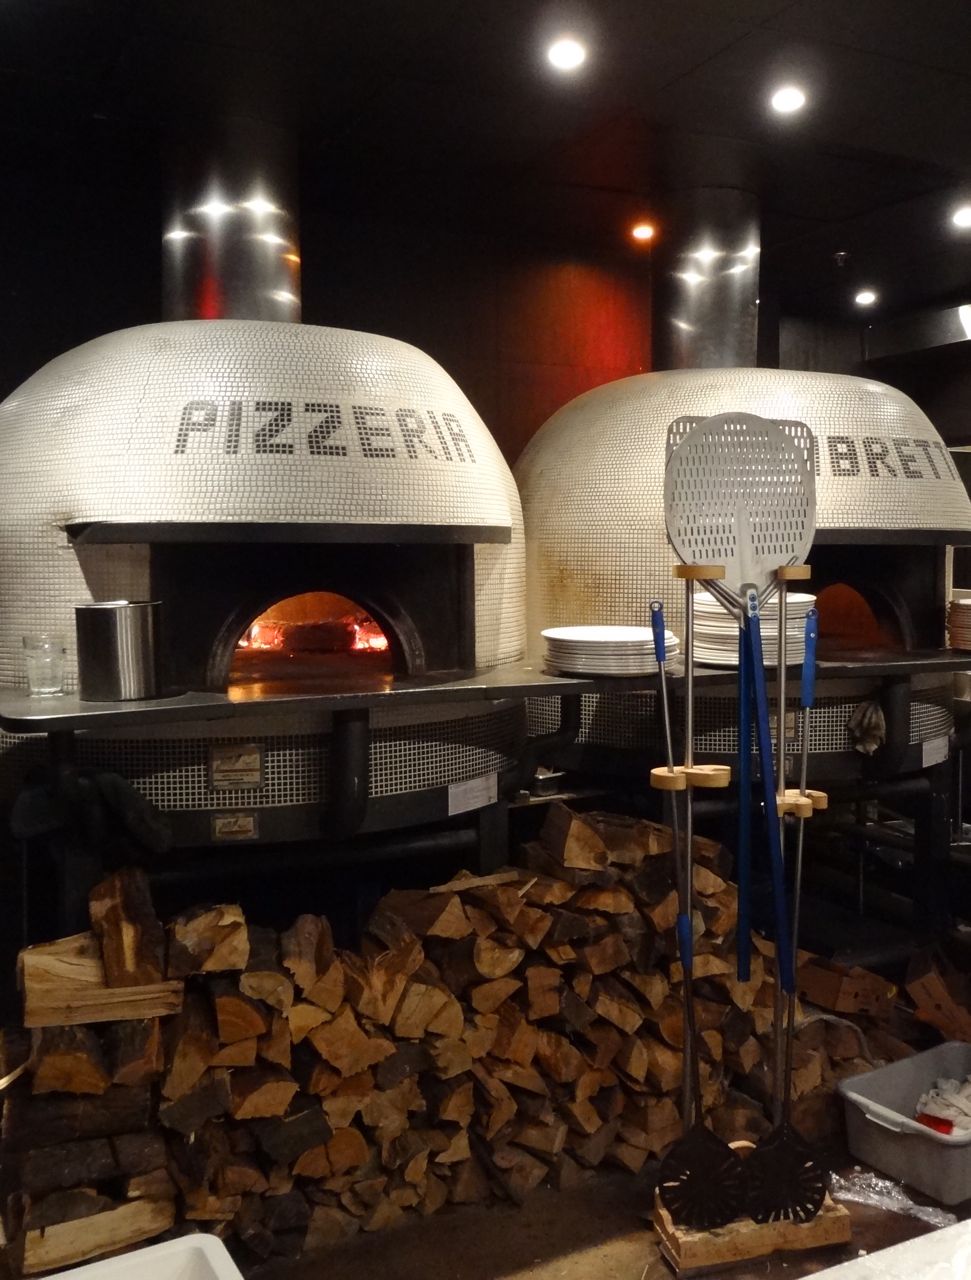 wood fired pizza oven kits